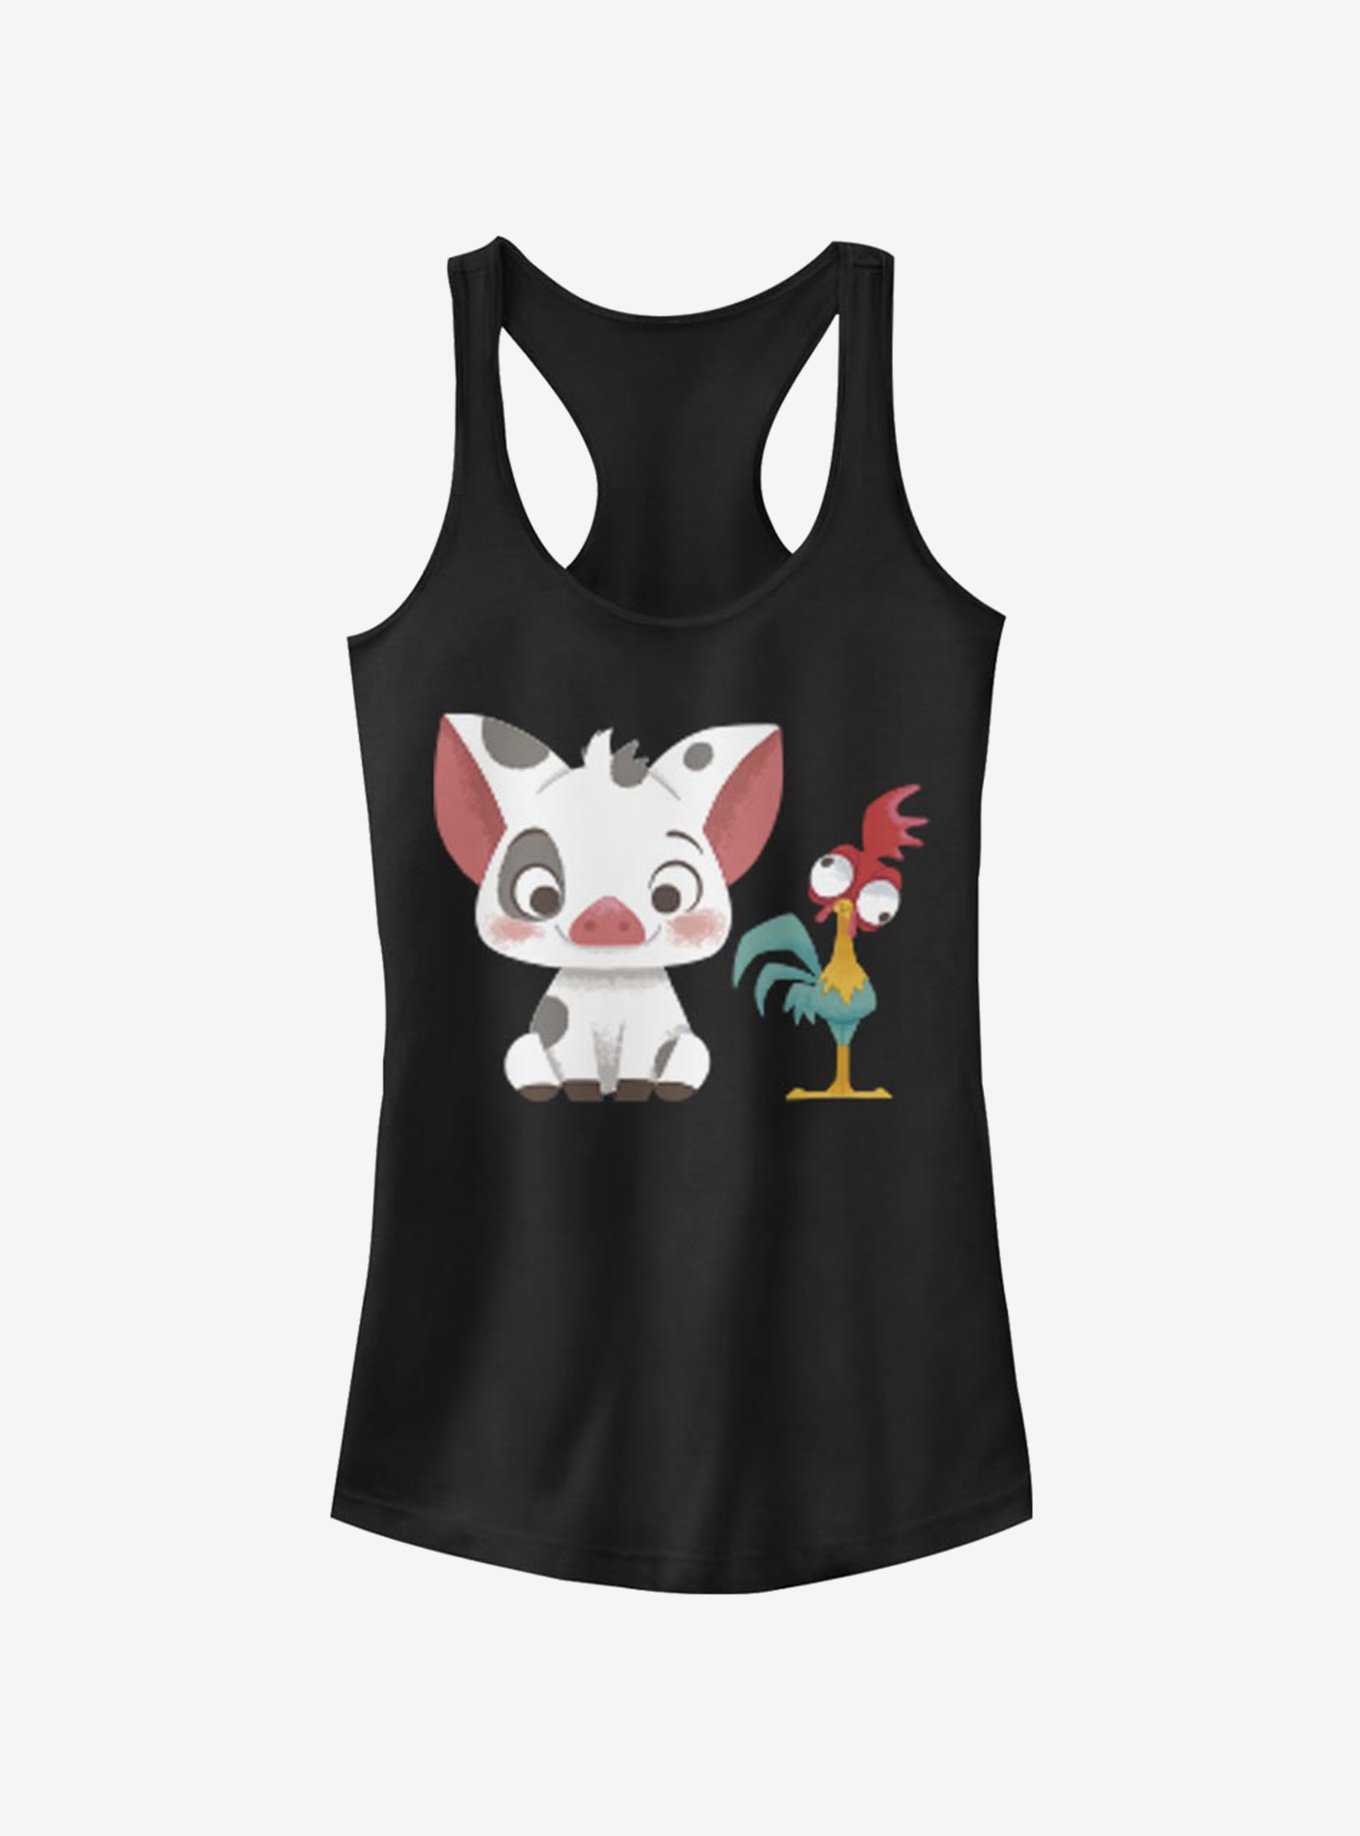 Disney Channel More Dogs Womens Tank Top - BLACK